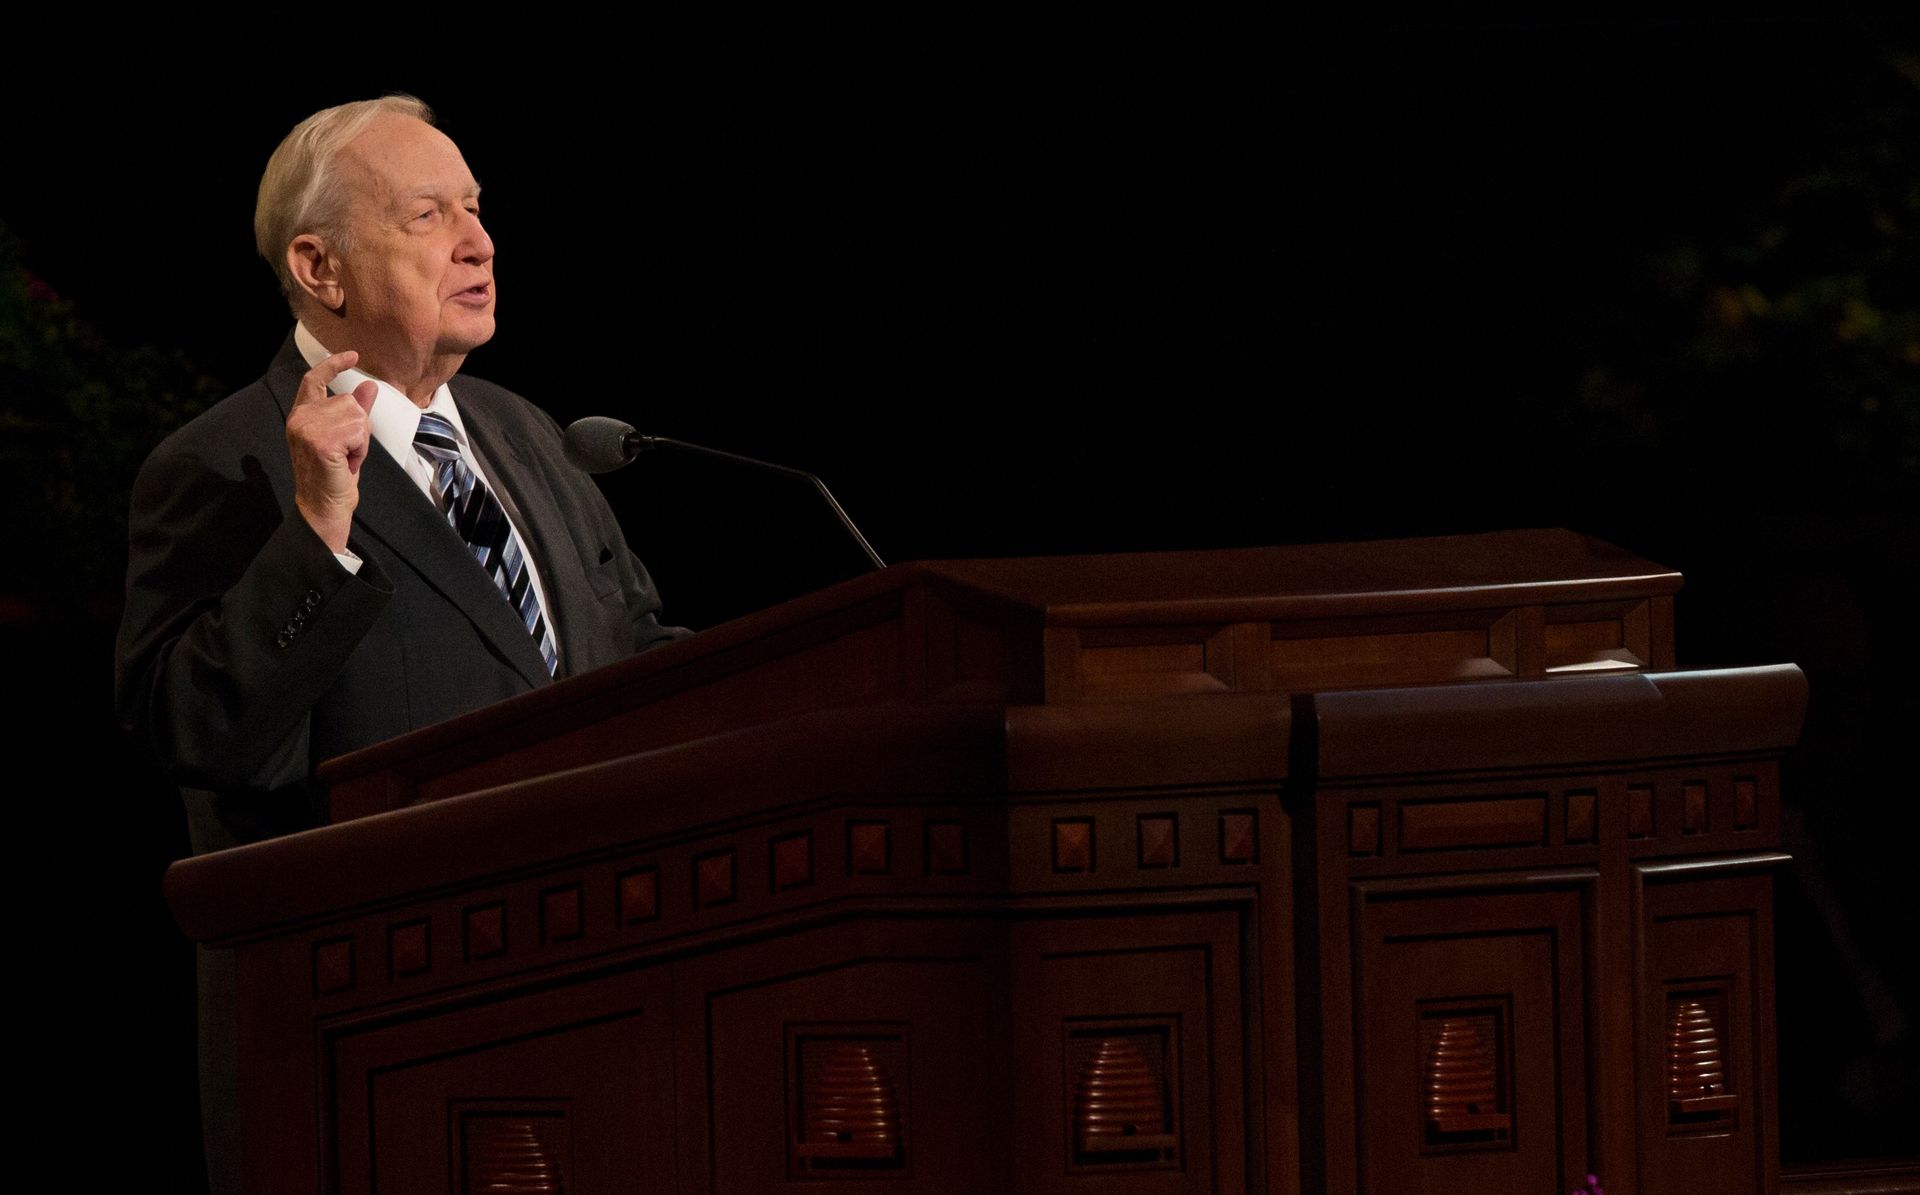 Richard G. Scott speaking at the pulpit in general conference.